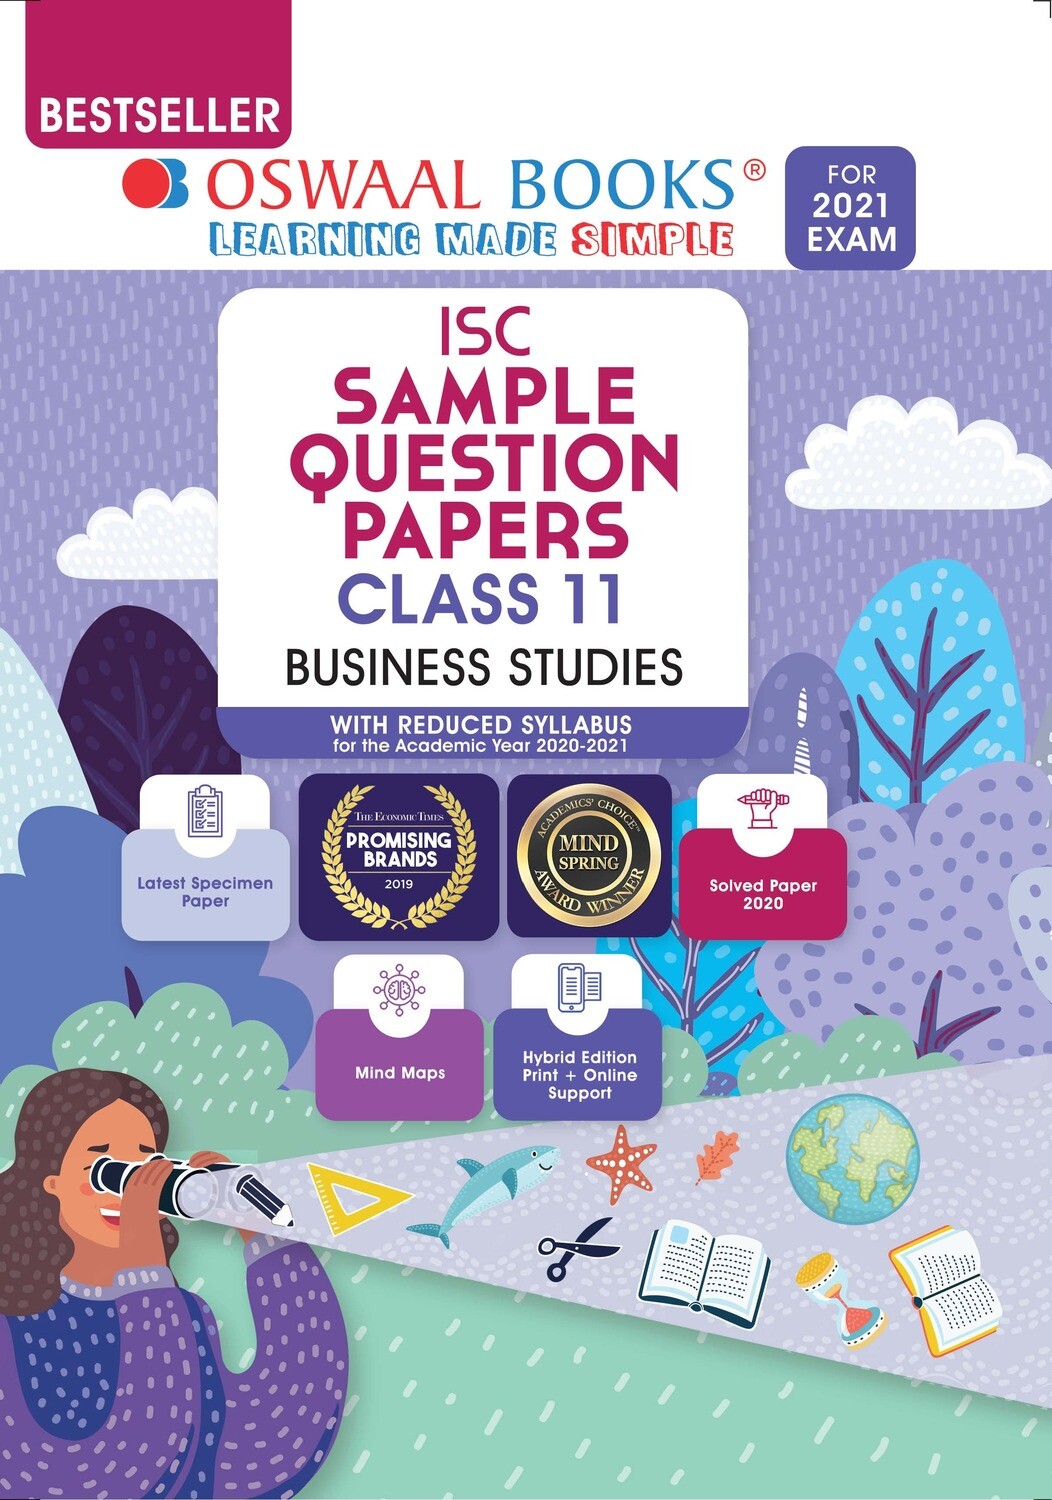 Buy e-book: Oswaal ISC Sample Question Paper Class 11 Business Studies (For 2021 Exam)